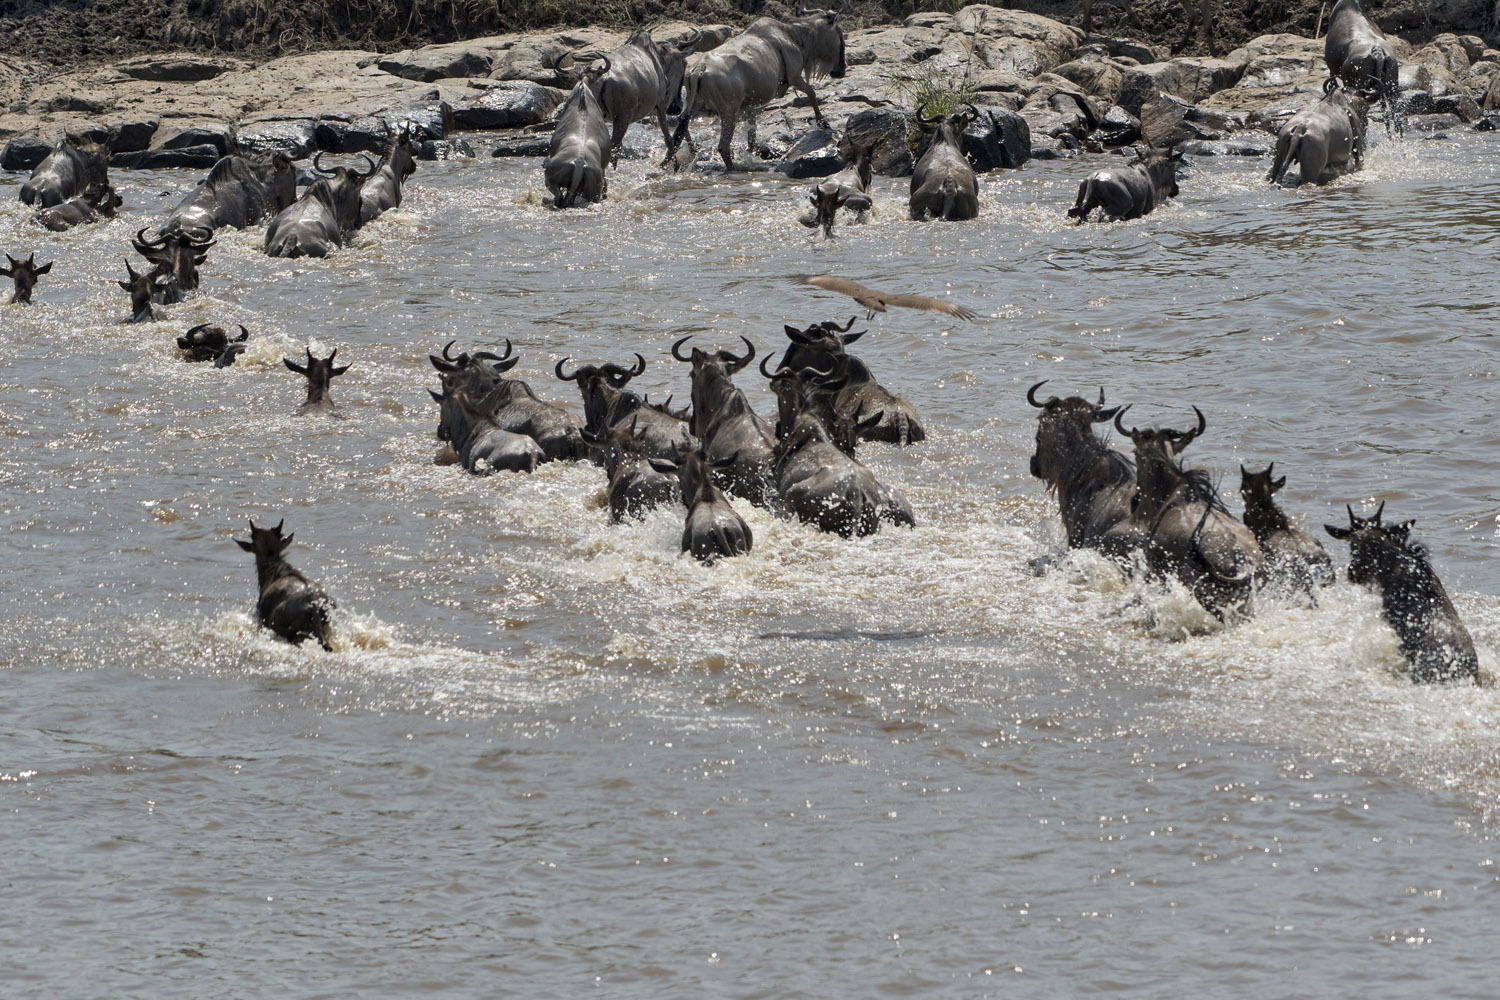 river Mara crossing by Wildebeests during their migration